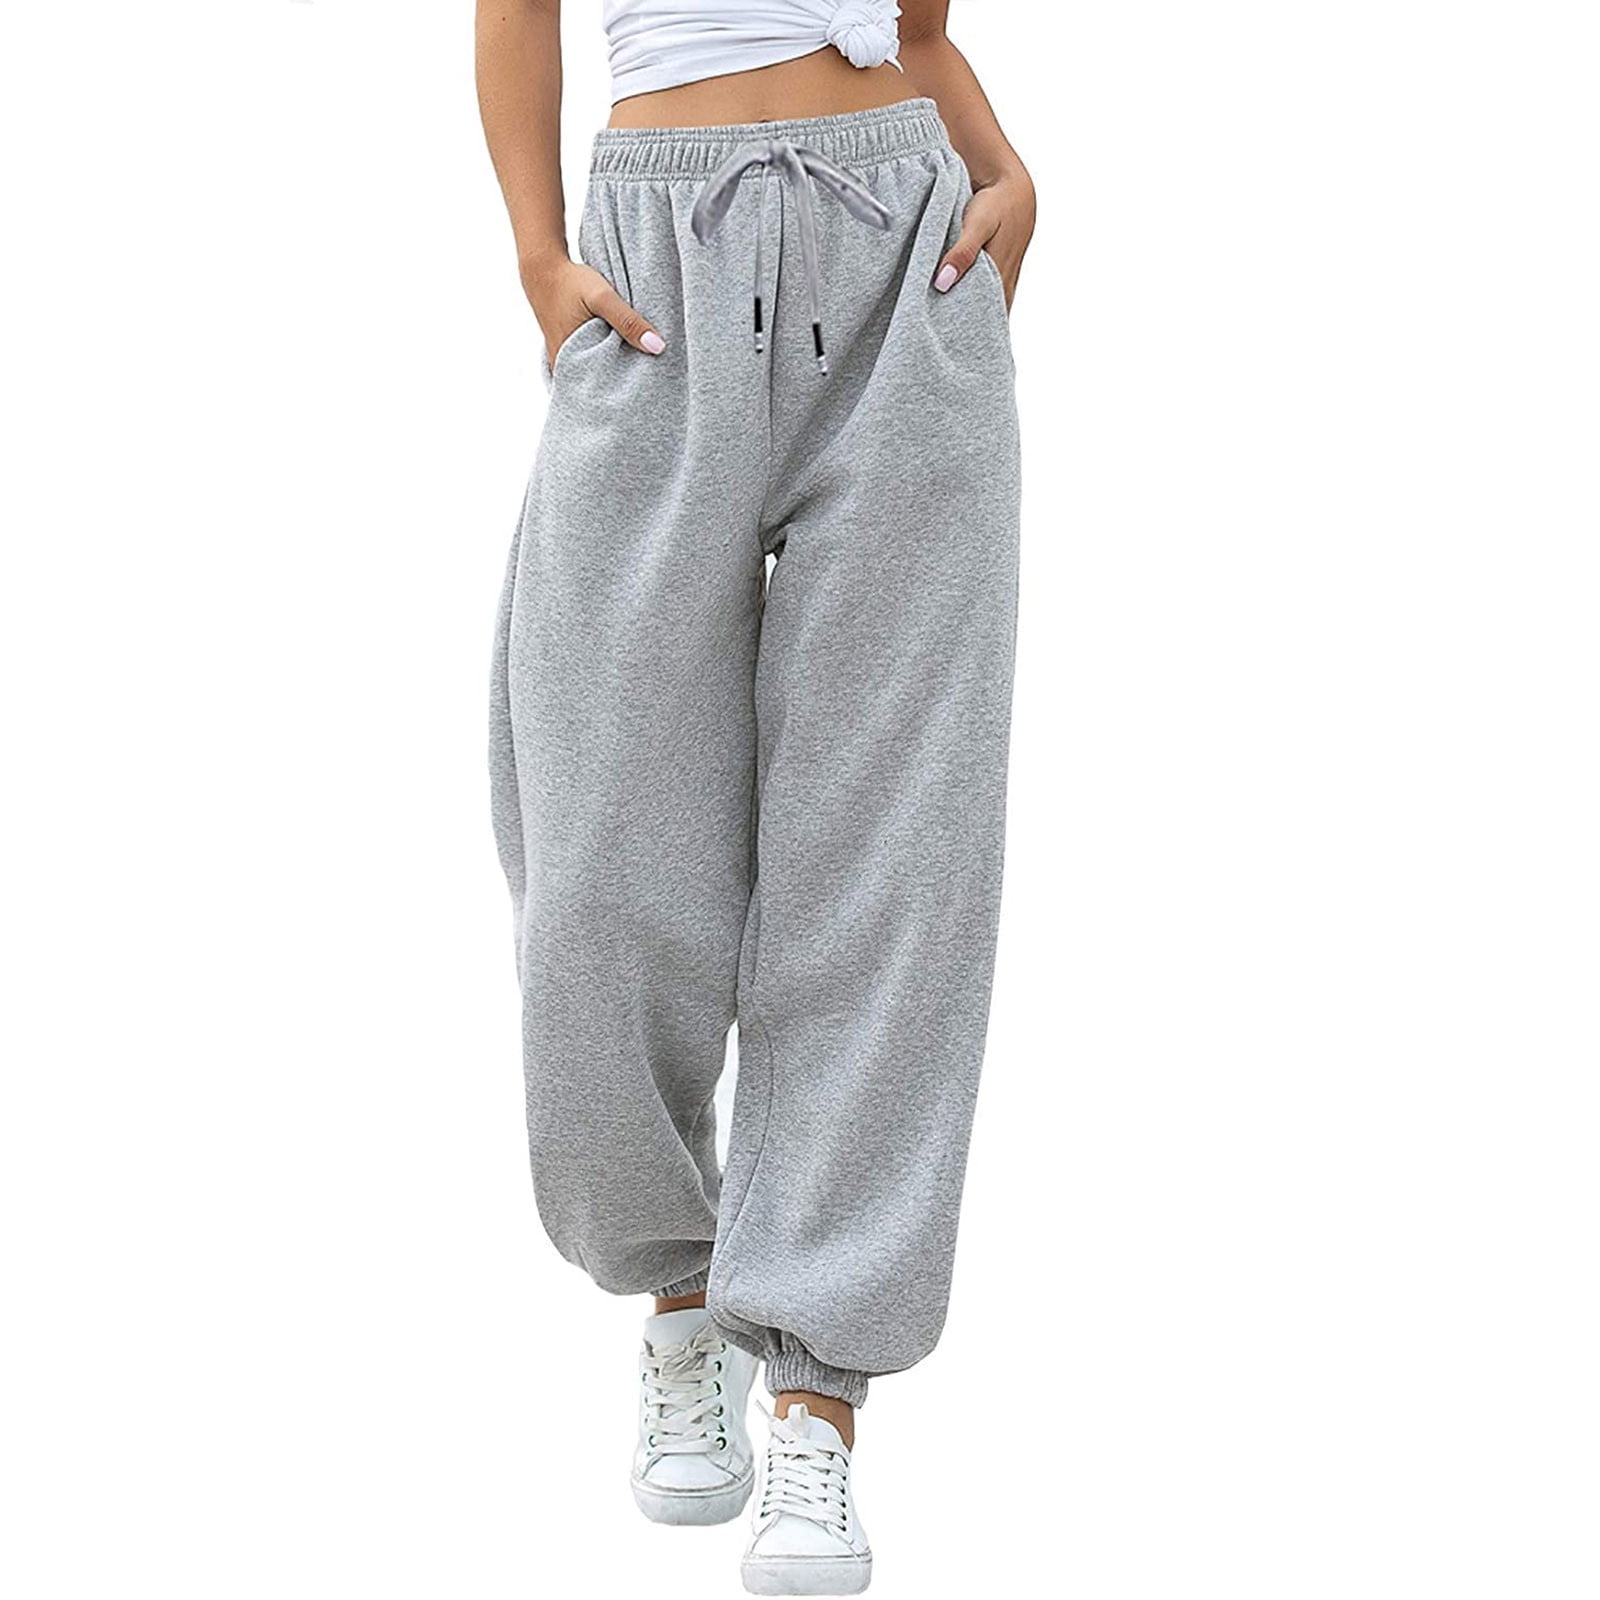 Stamzod sweatpants women Clearance Solid color baggy sweatpants for ...